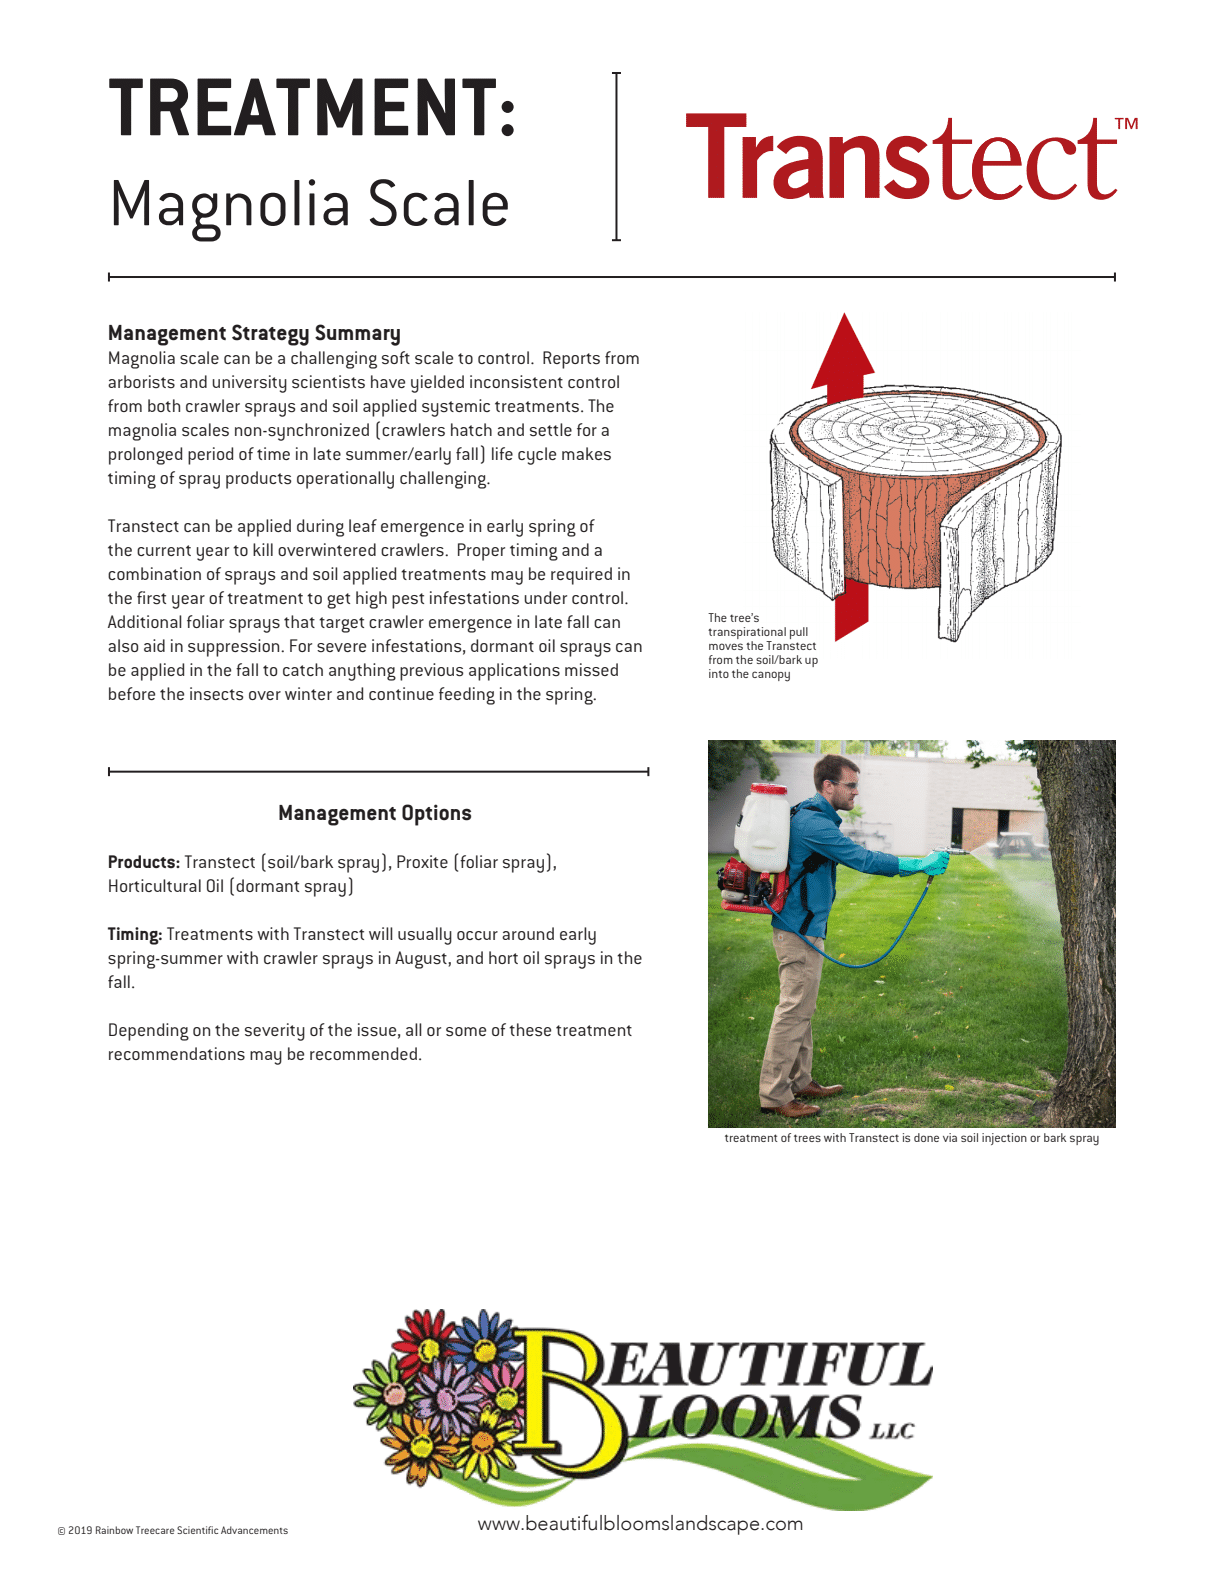 This image is an informational brochure about treating Magnolia Scale with a product called Transtect. It includes management summaries, options, and a photo of a person applying treatment.